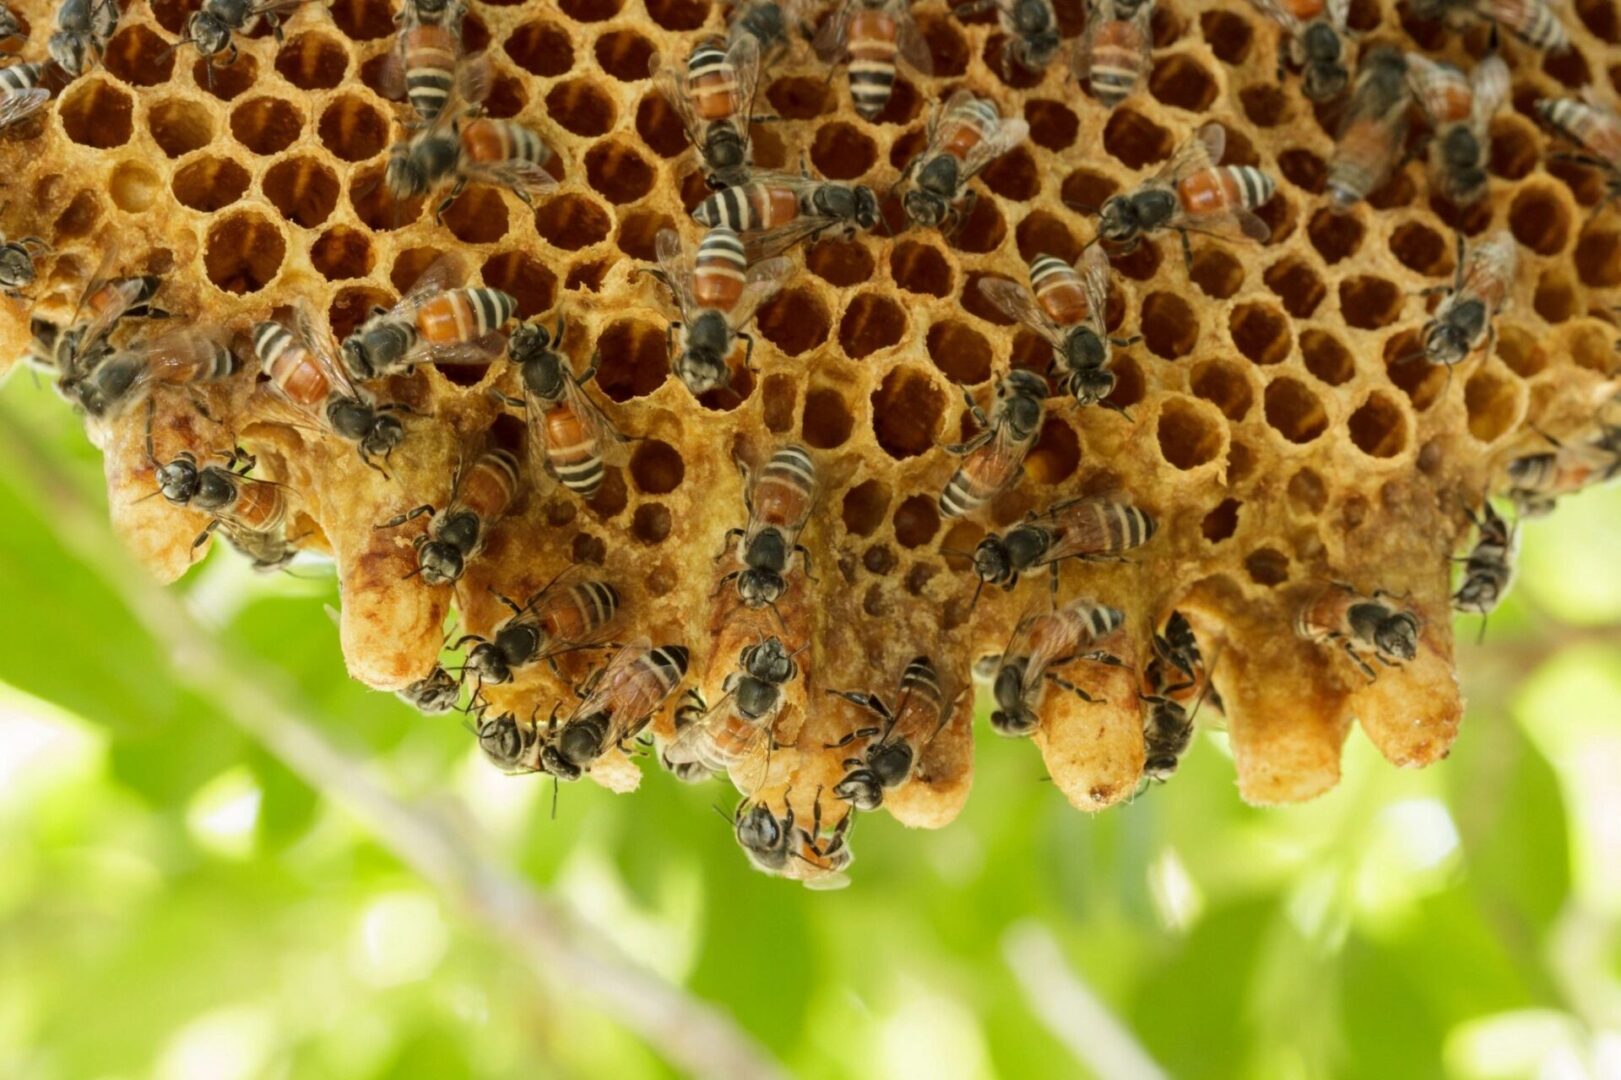 A close up of bees on a honeycomb